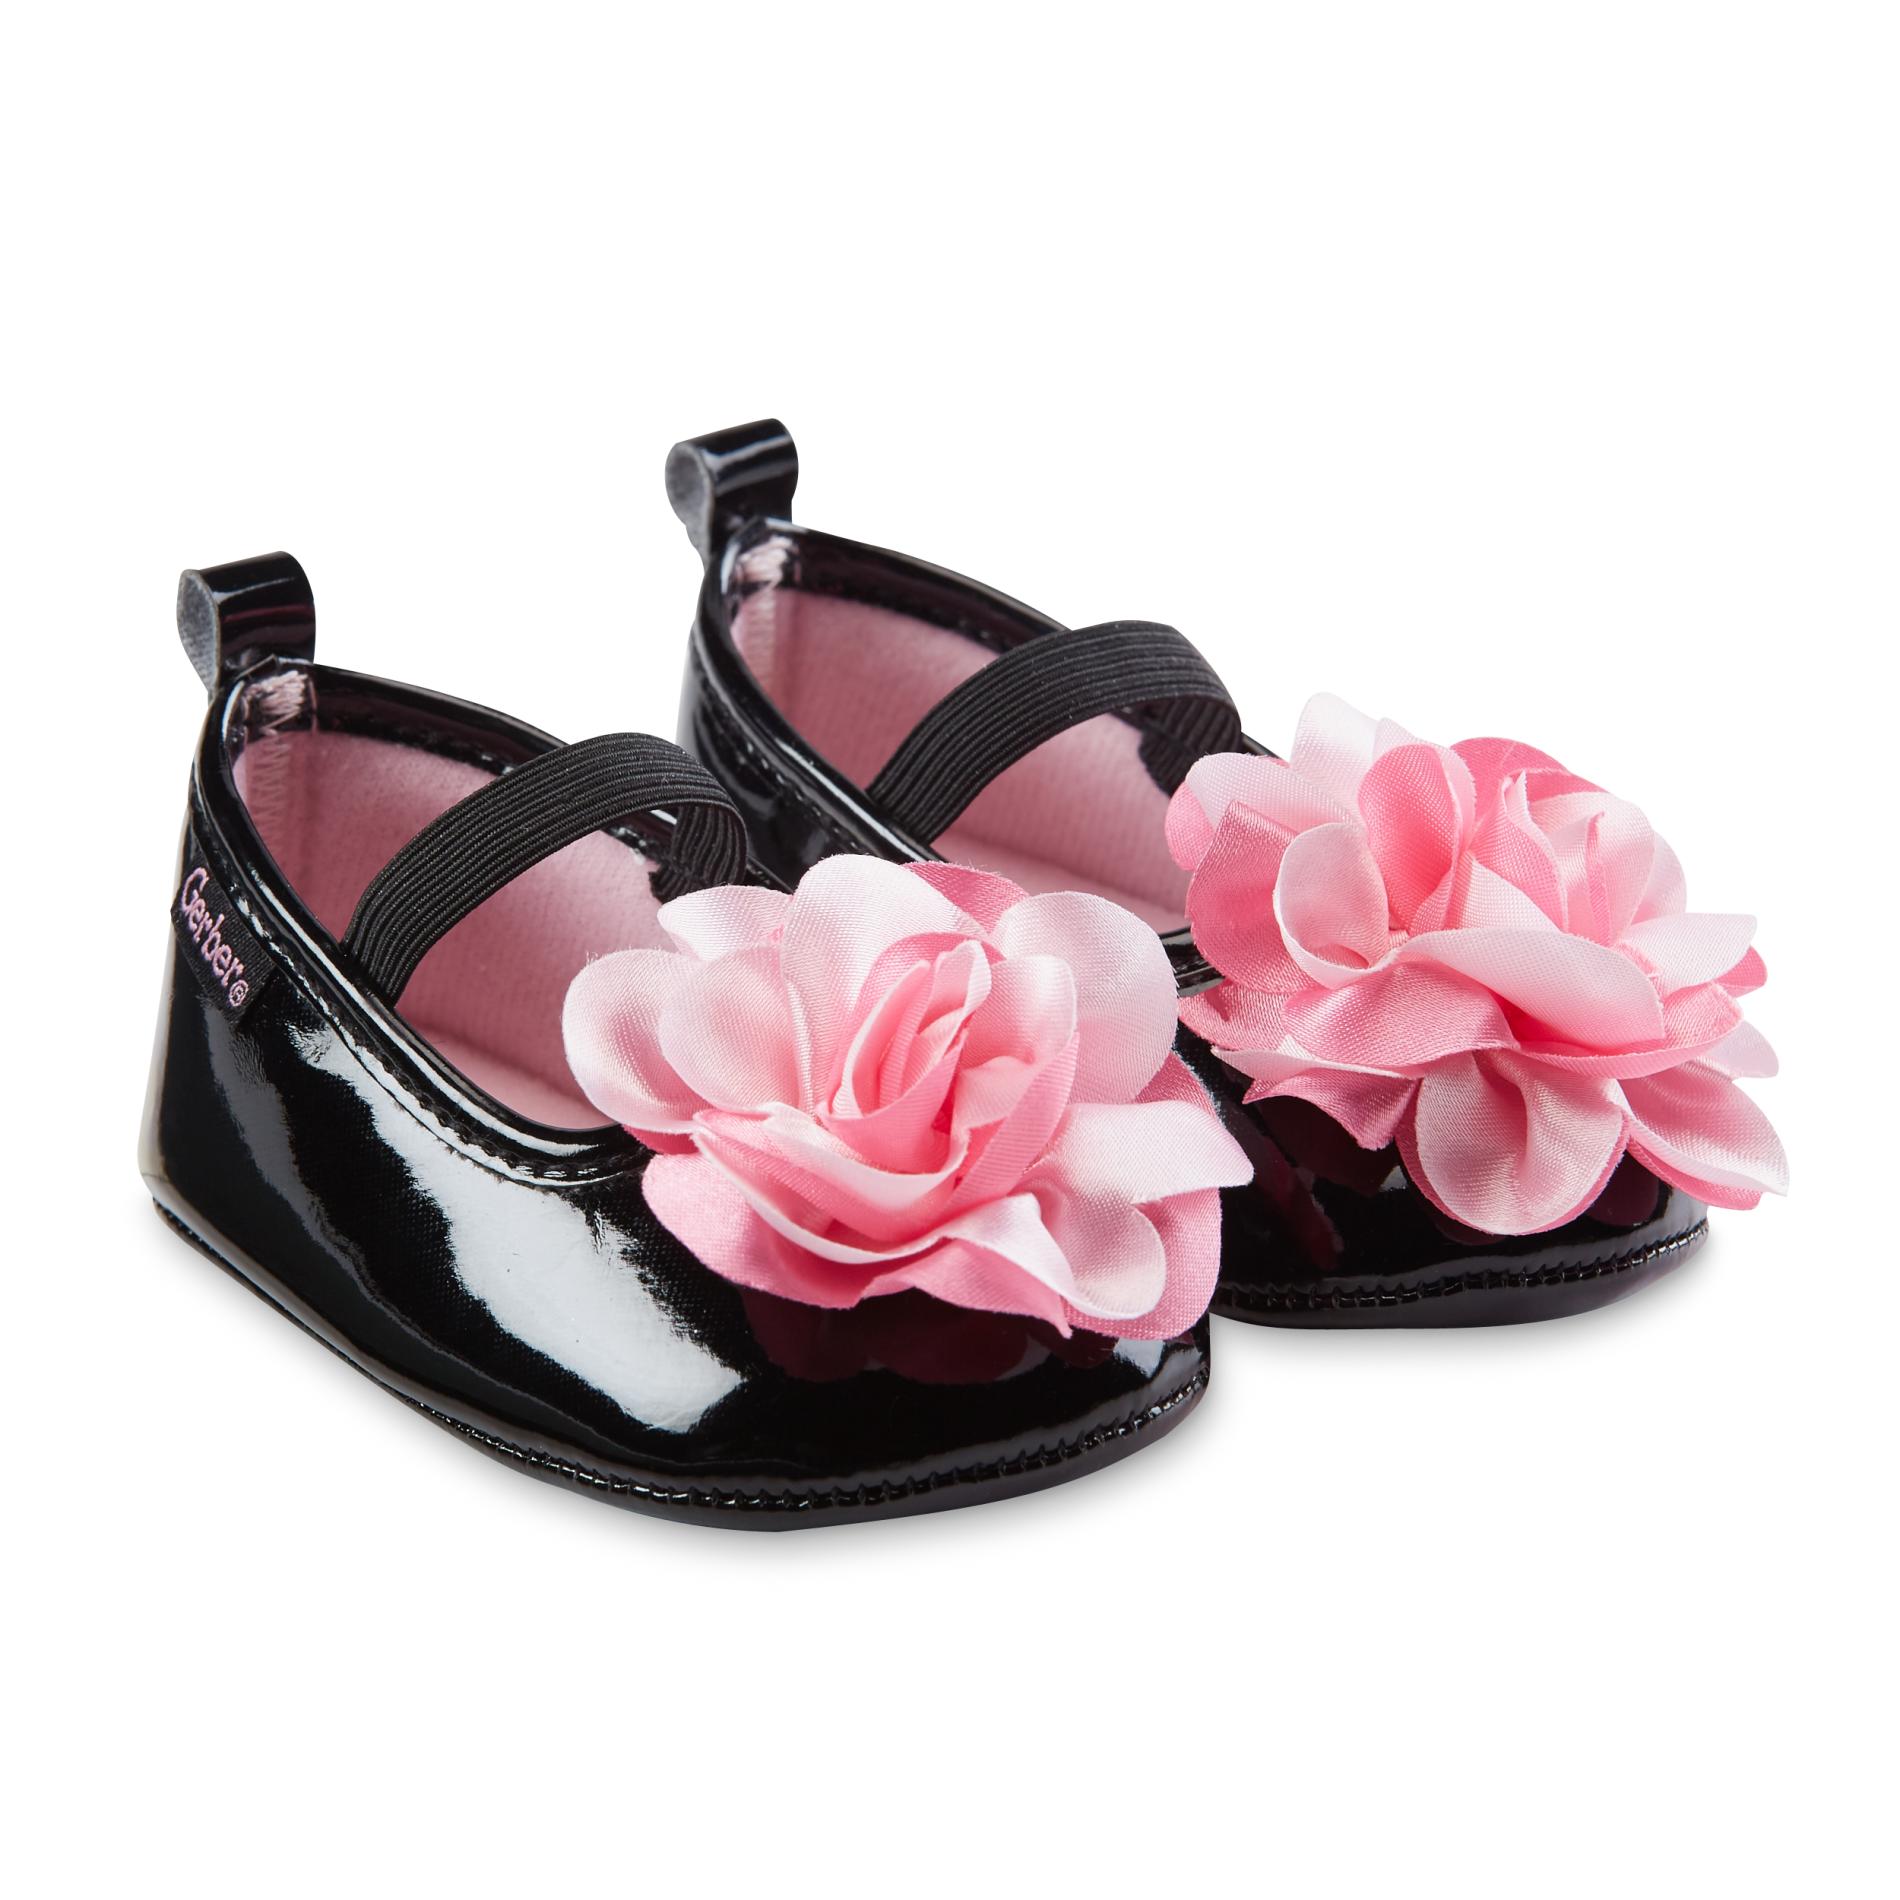 Gerber Baby Girl's Black Mary Jane Shoes